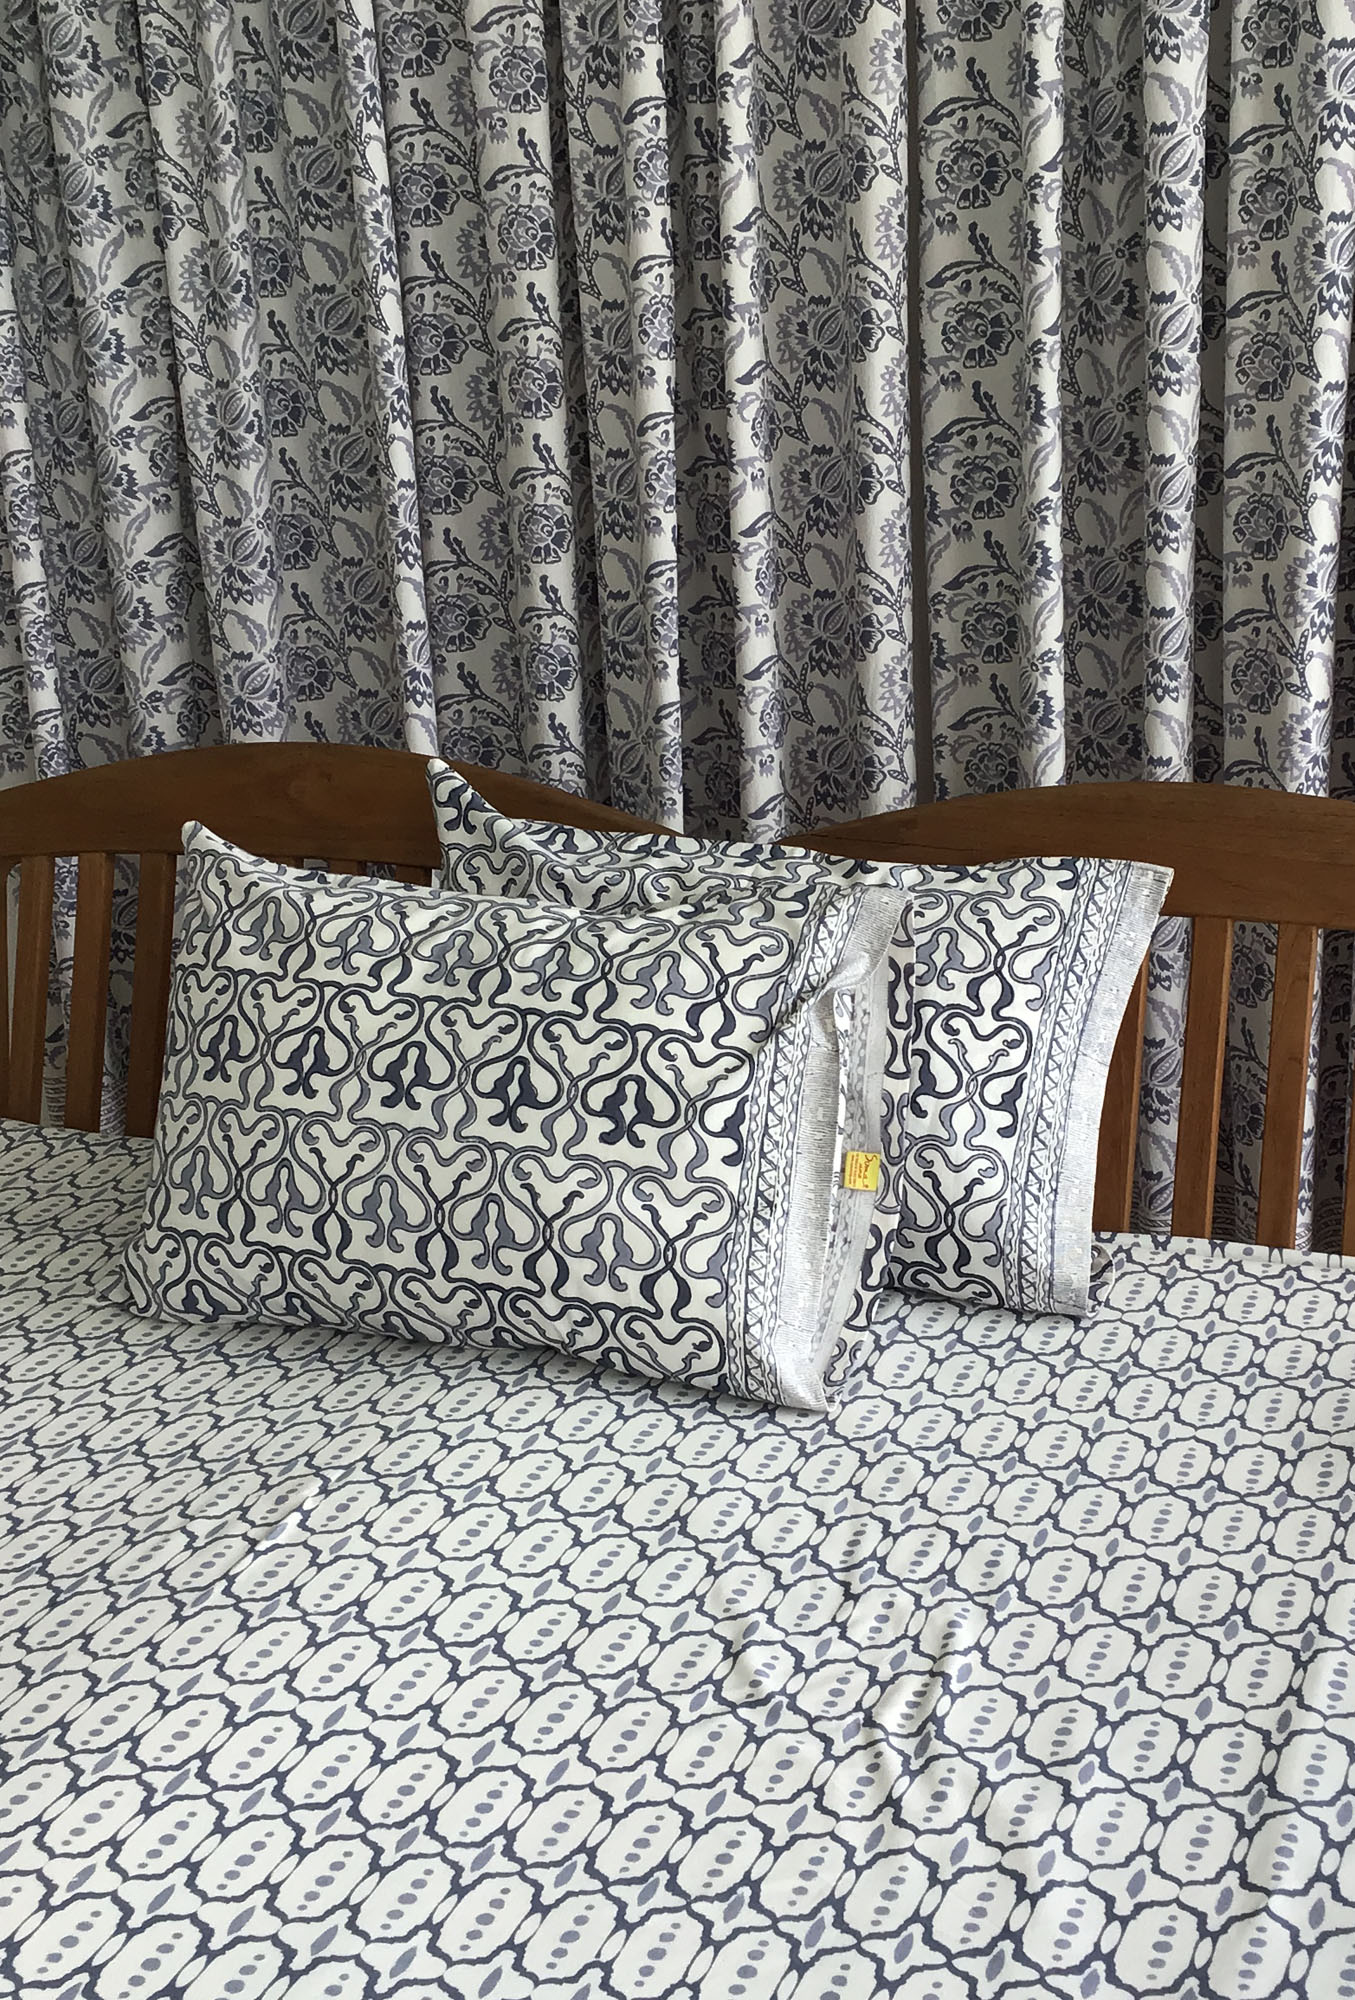 Hand Block Printed Pillow Cases Online